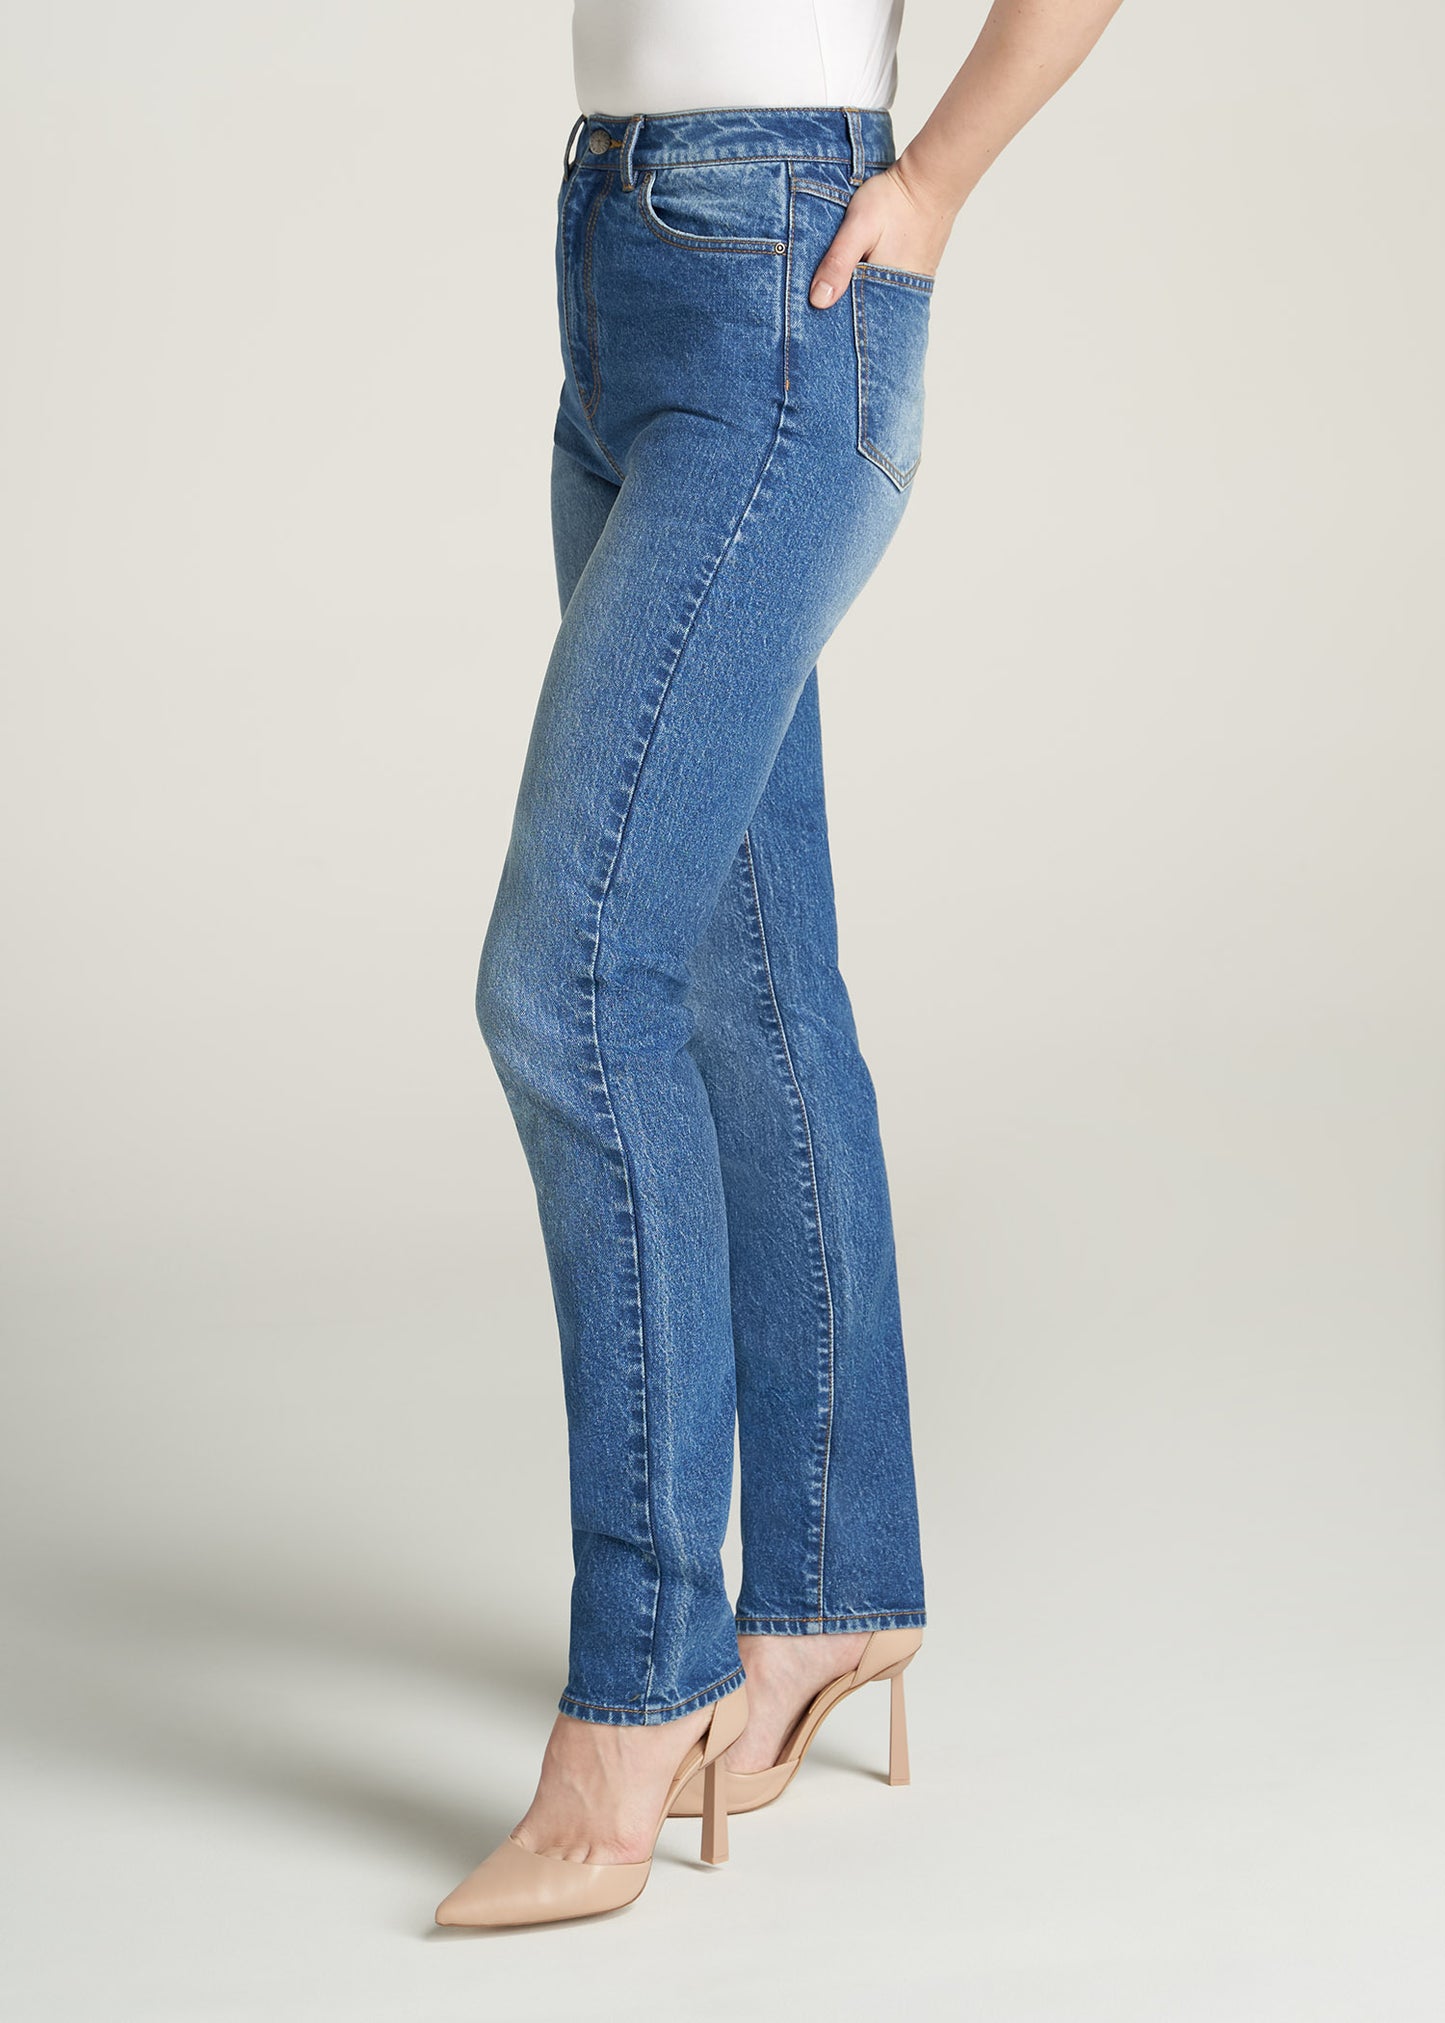 The Lola - Stretch Slim-Fit Tall High Waisted Jeans for Tall Women in Light  Stonewashed Blue